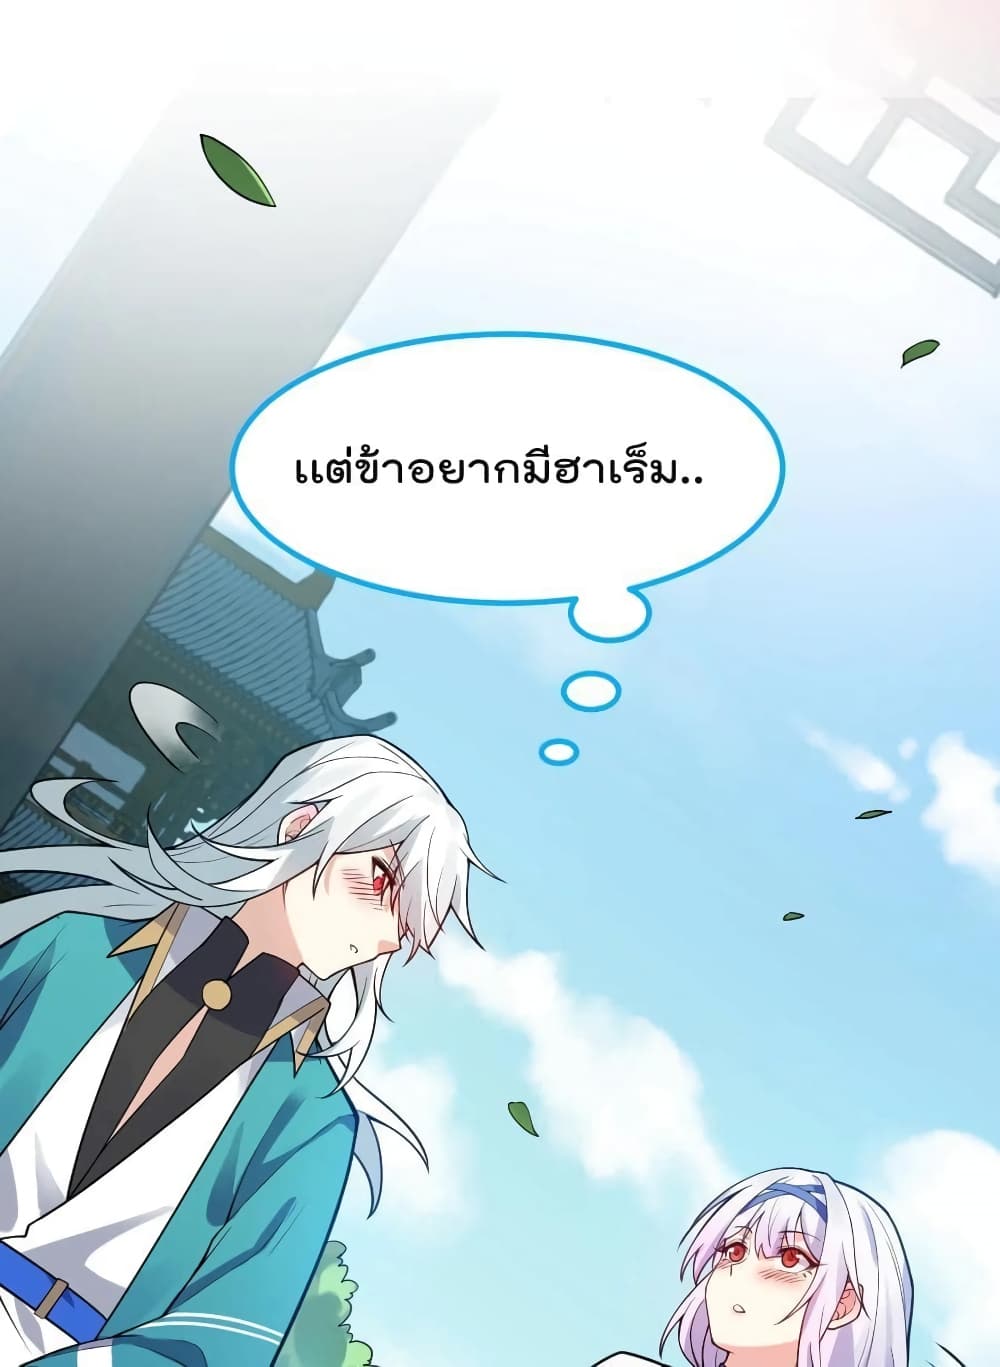 Godsian Masian from Another World ตอนที่ 102 (15)